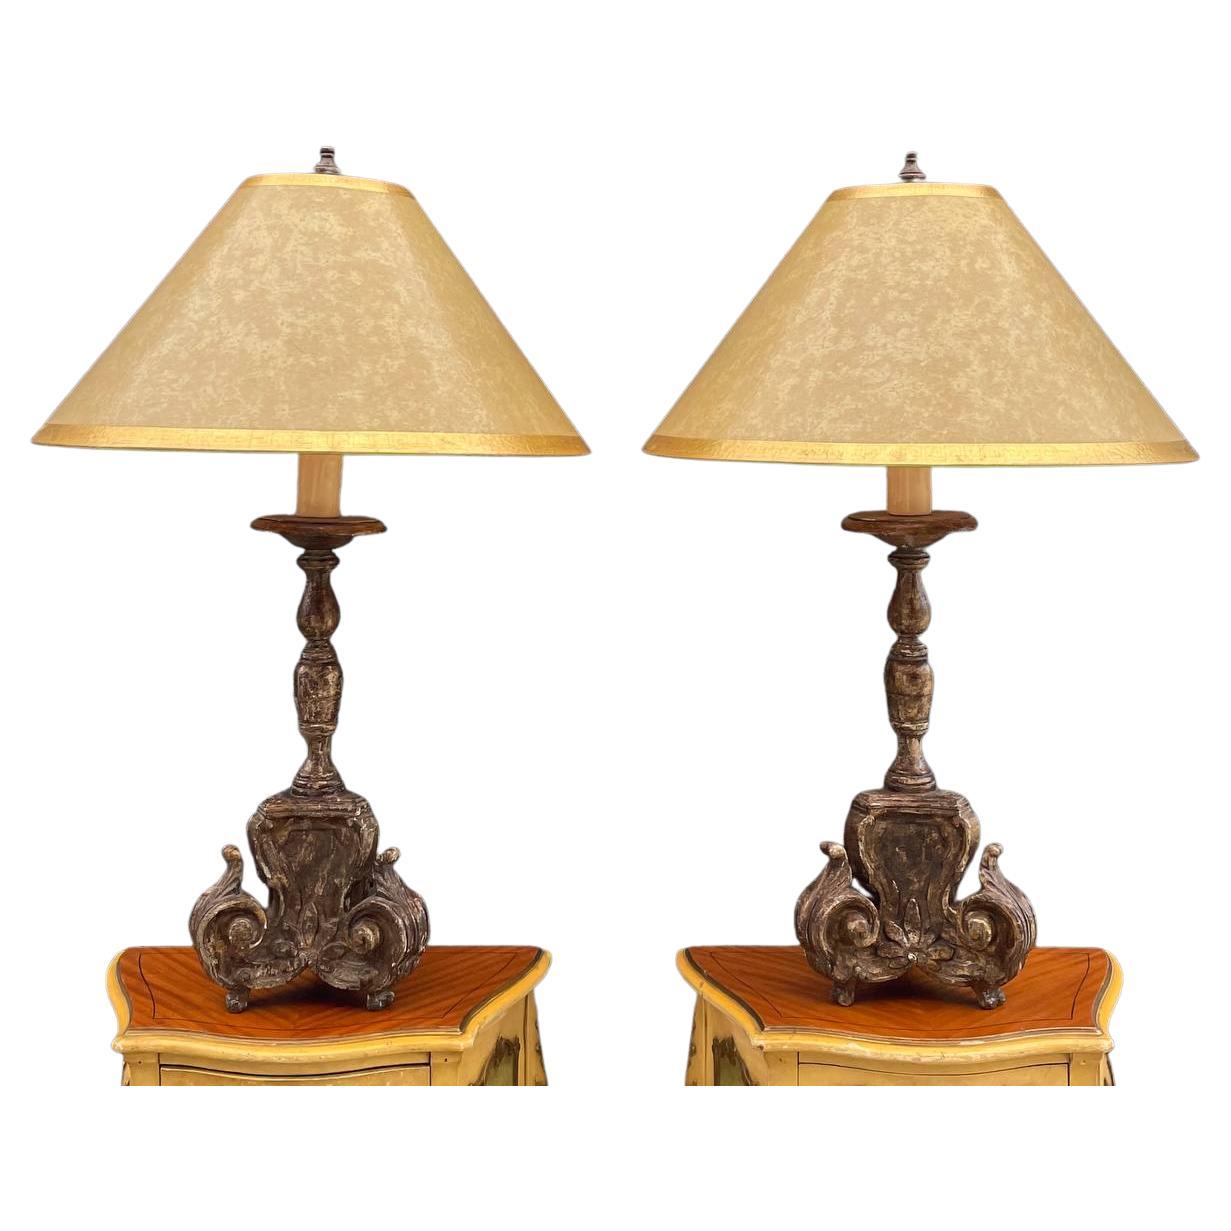 Pair of Italian Antique Candlestick Style Table Lamps with a Distressed Paint F For Sale